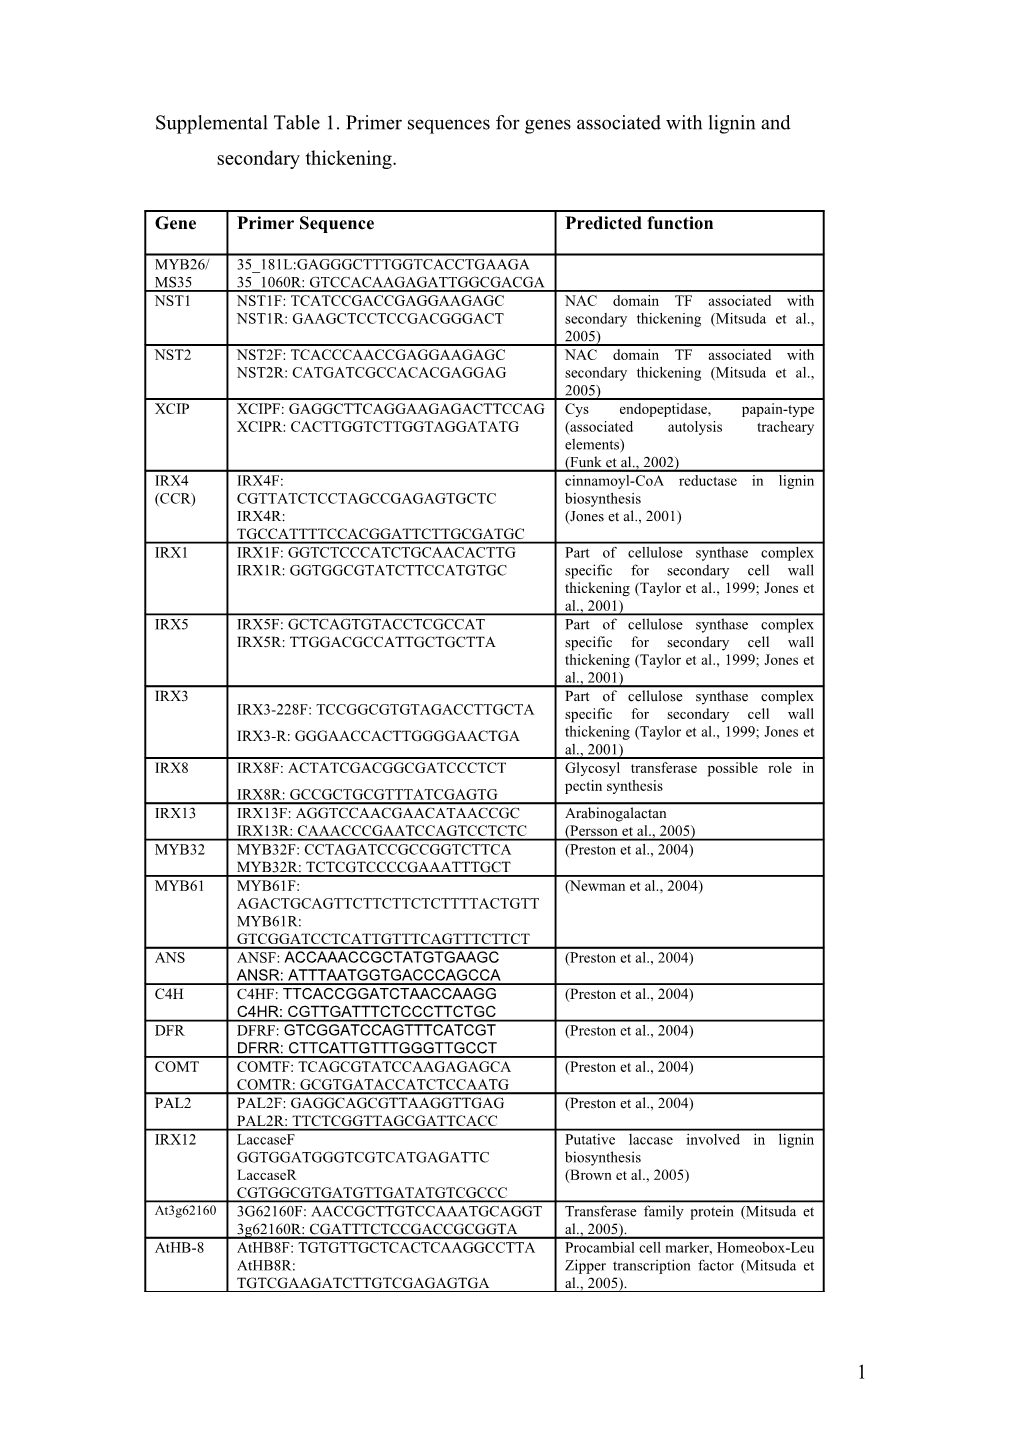 Supplemental Table 1. Primer Sequences for Genes Associated with Lignin and Secondary